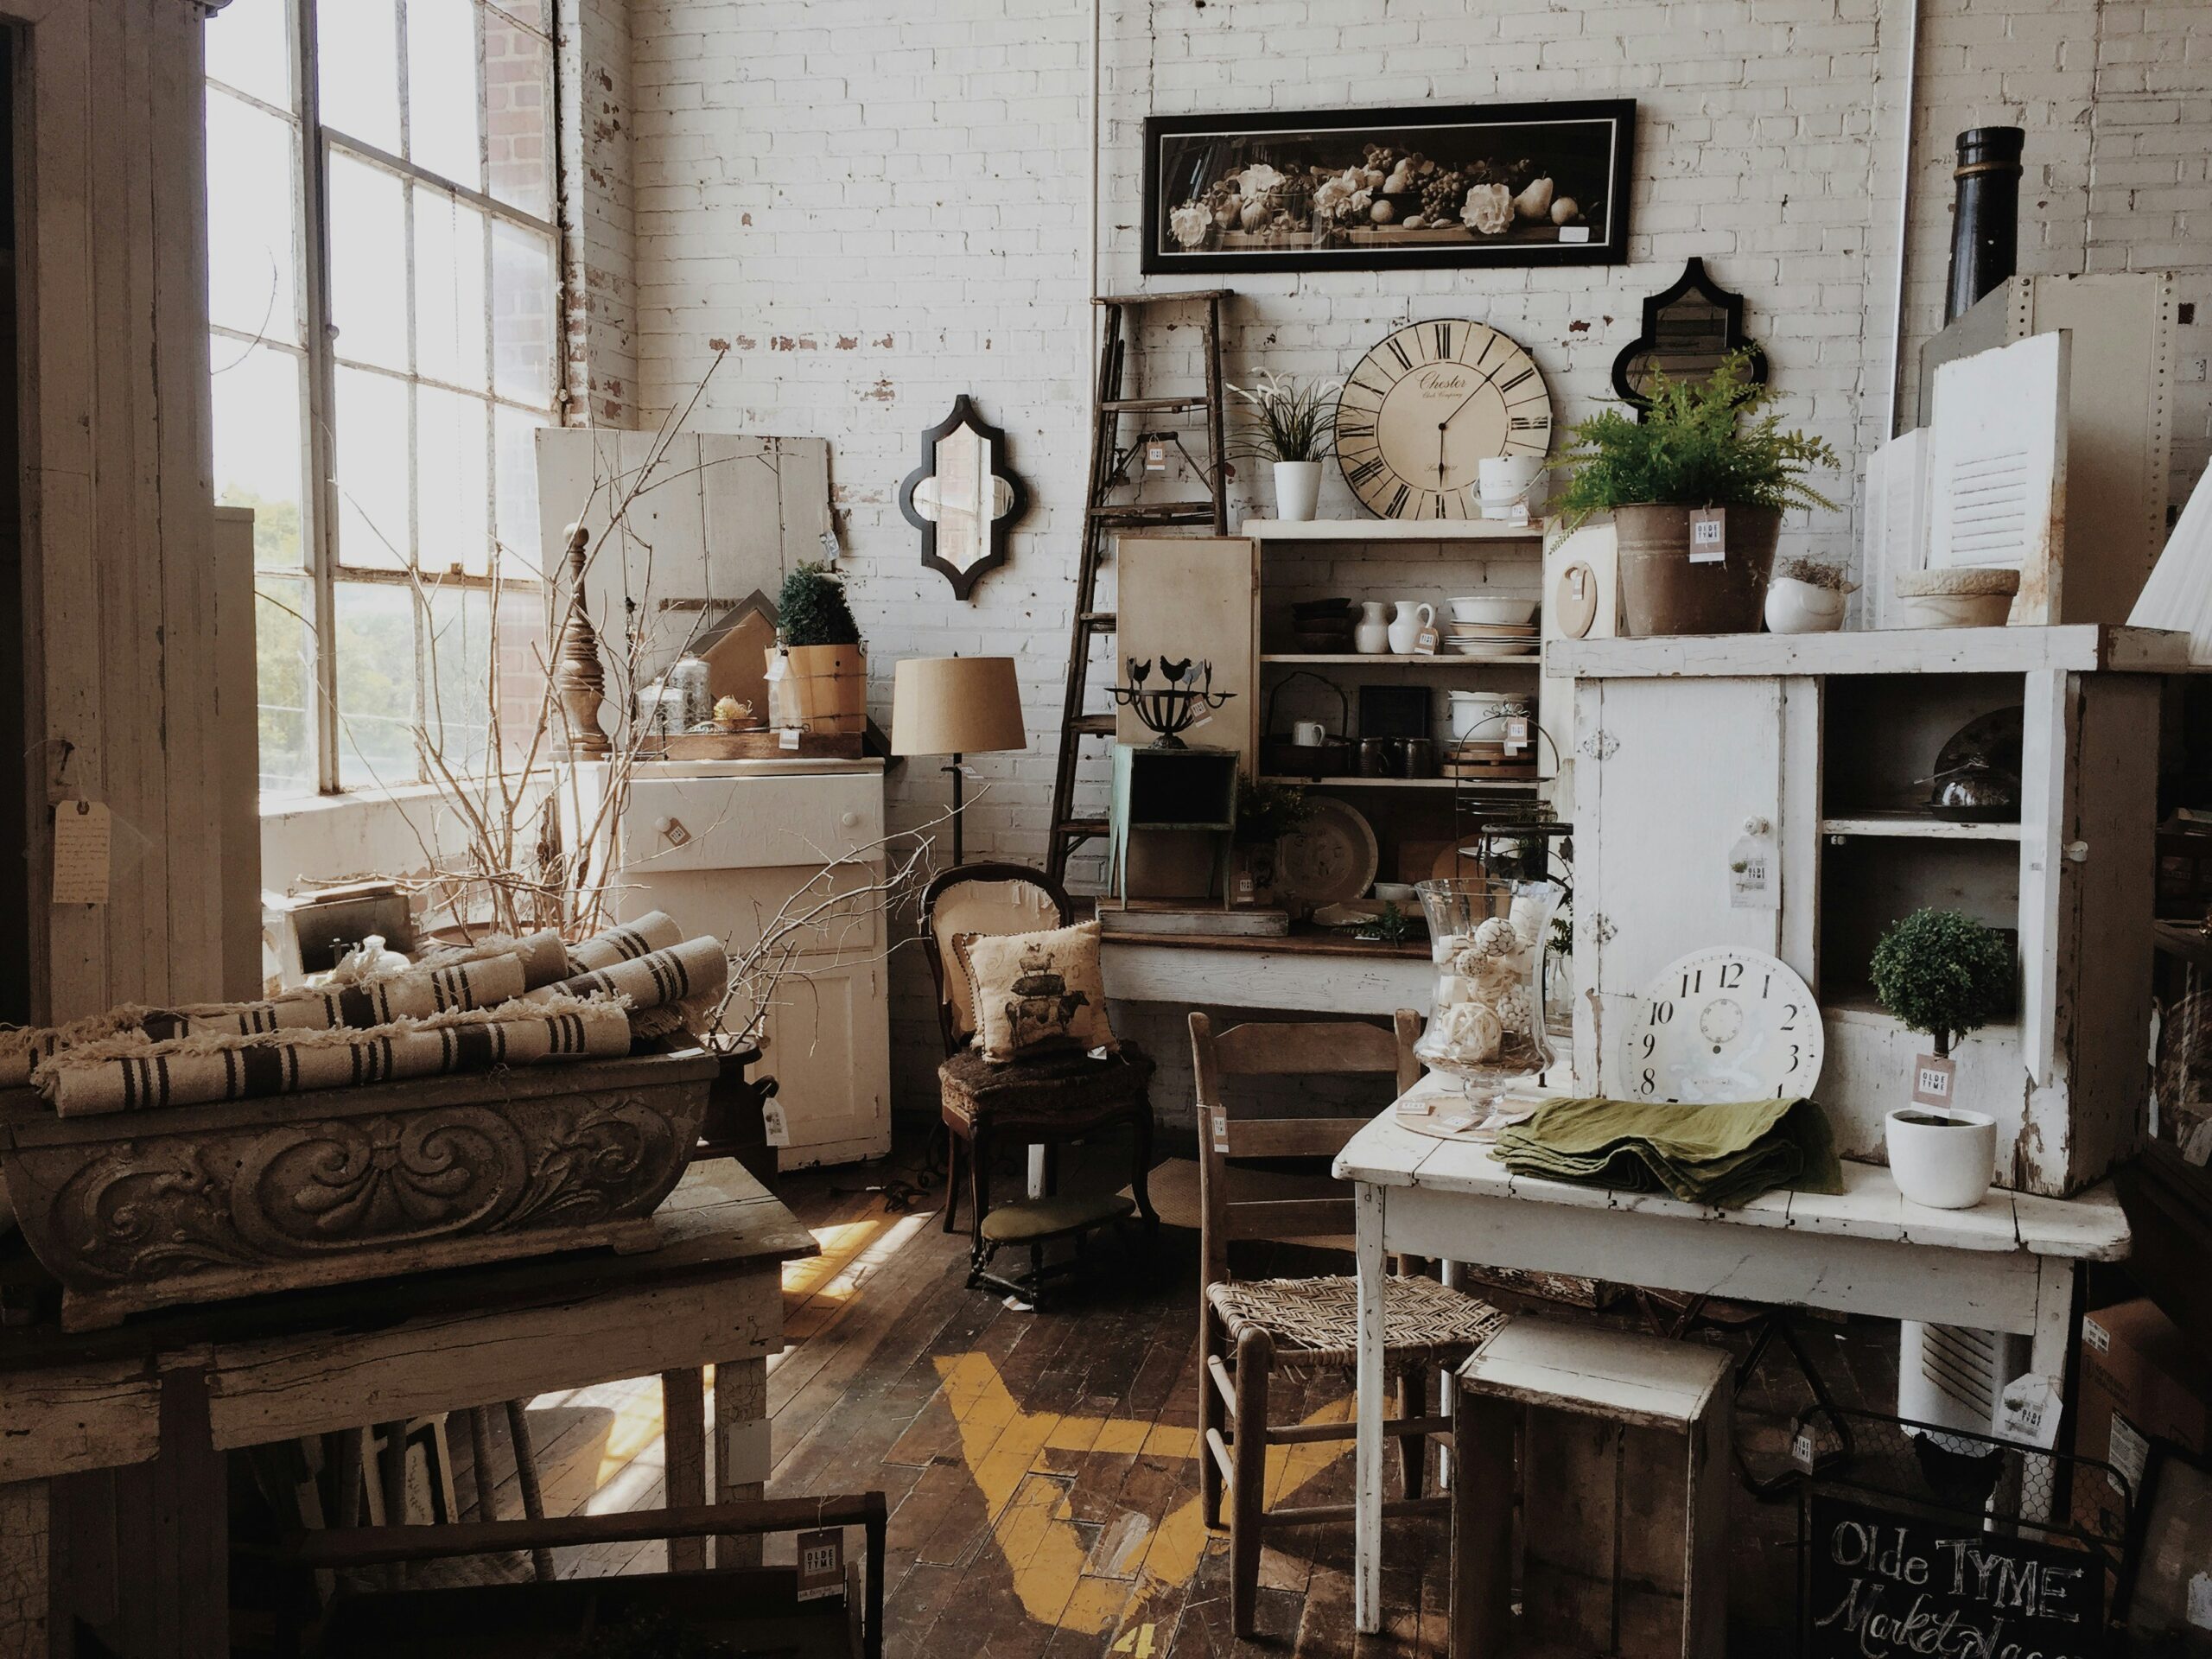 Where to Score Unique Home Decor and Furnishings in Baltimore After Your Move